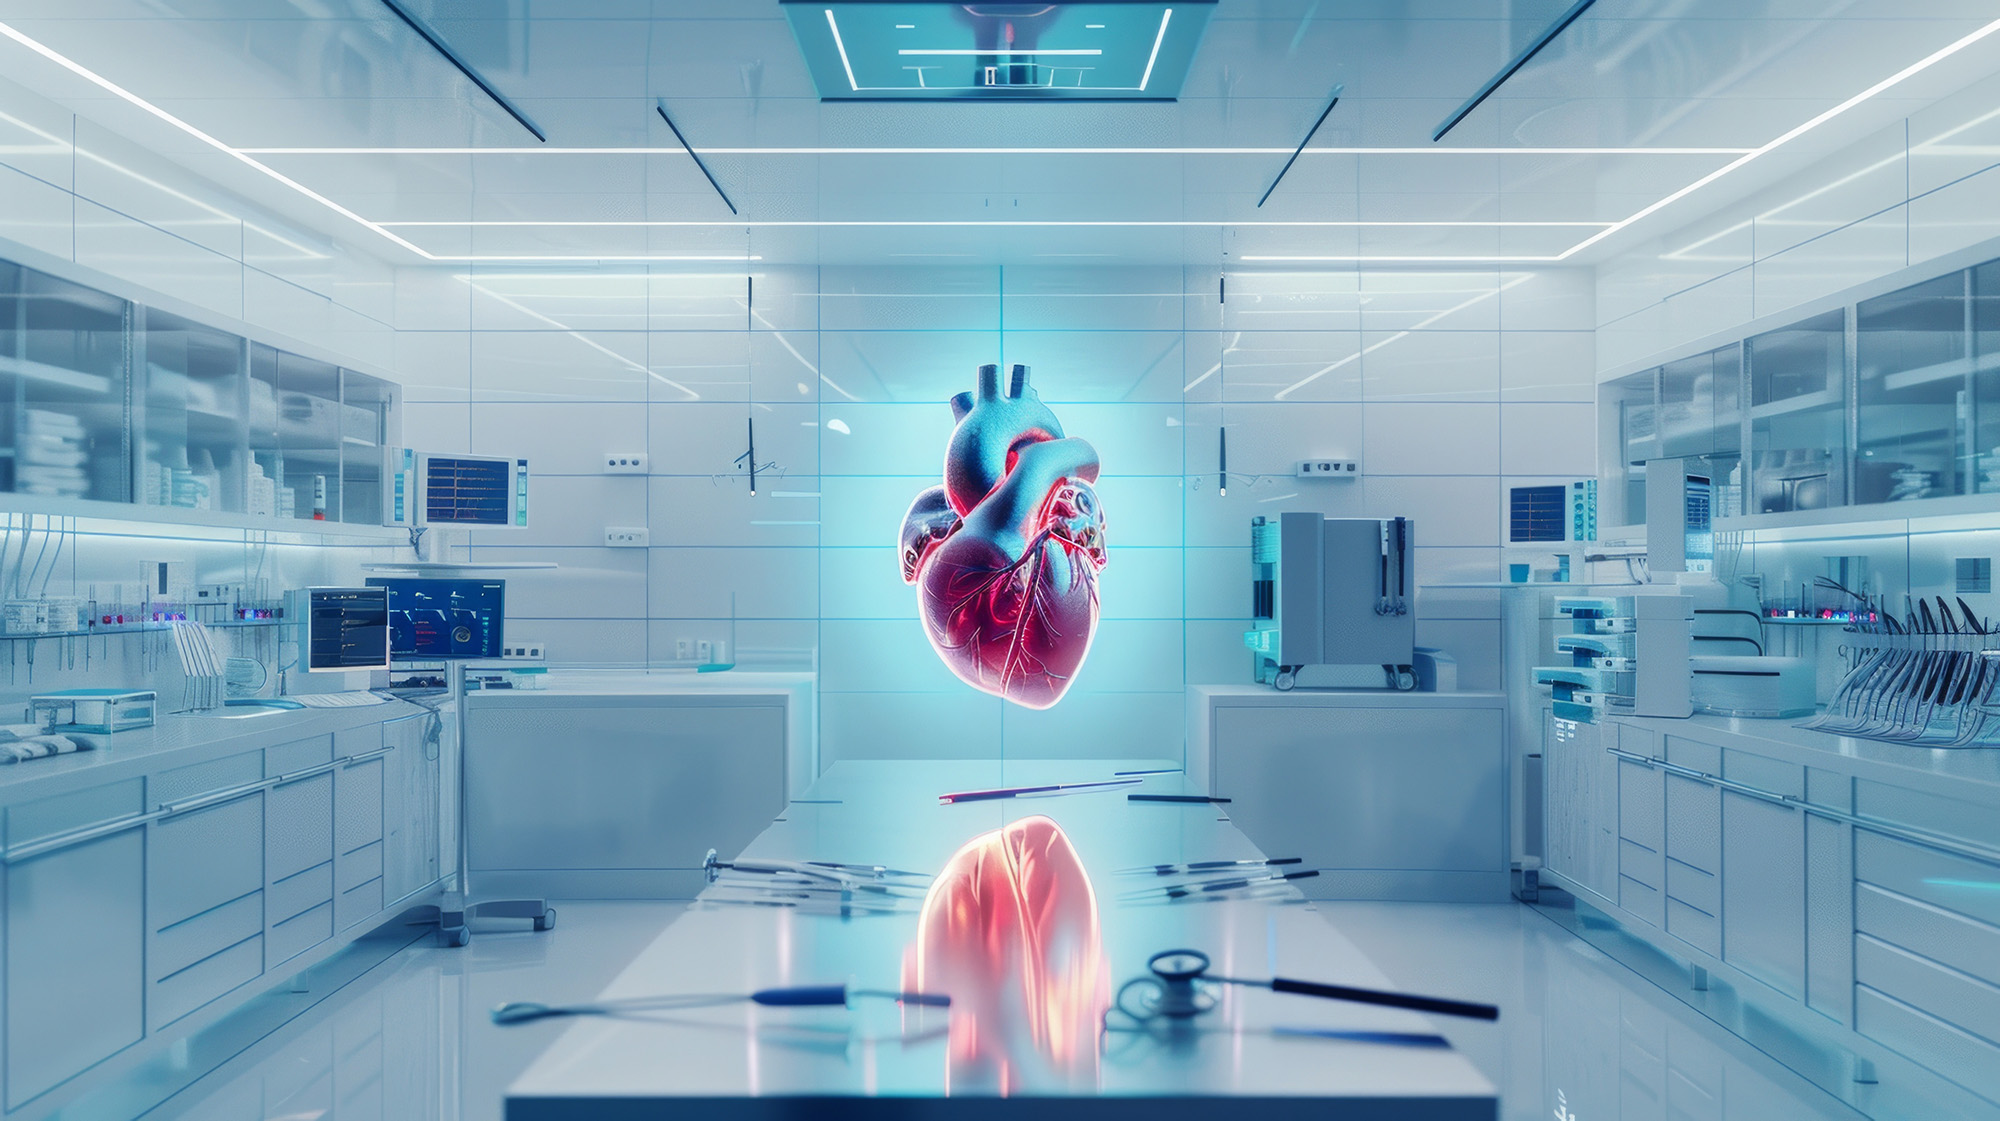 Medical healthcare digital hologram anatomy of human heart and organs concept, with graphical icon display ai holographic display assistant technology. 3d modeling with lab banner background